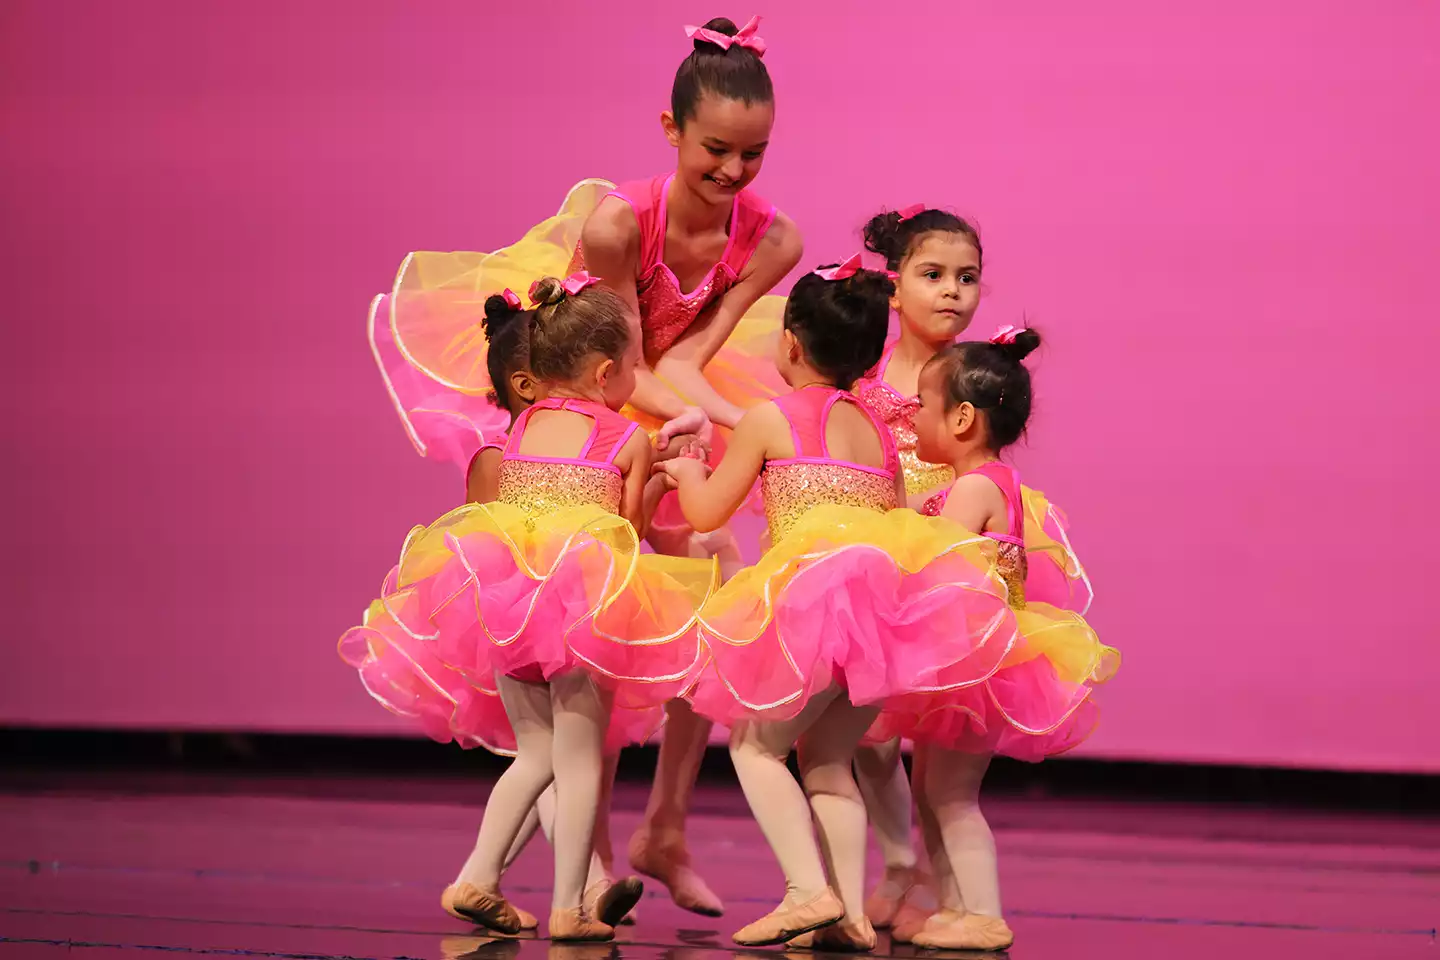 At DDF, our older dancers mentor and inspire our younger dancers.  This is never more evident than when our older dancers are 